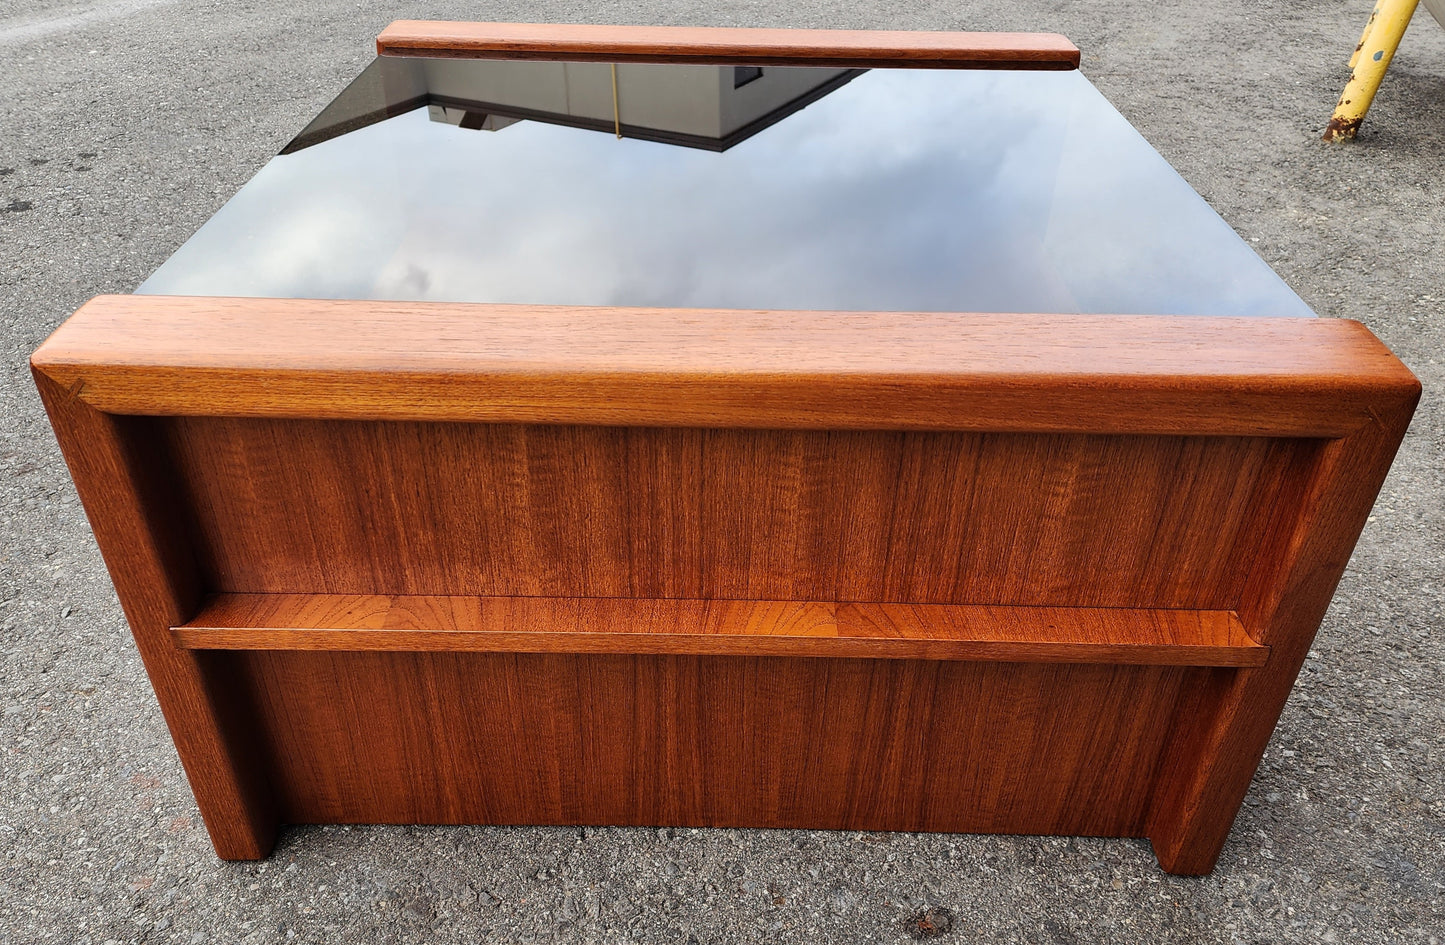 REFINISHED Mid Century Modern Teak & Glass Coffee Table with Storage